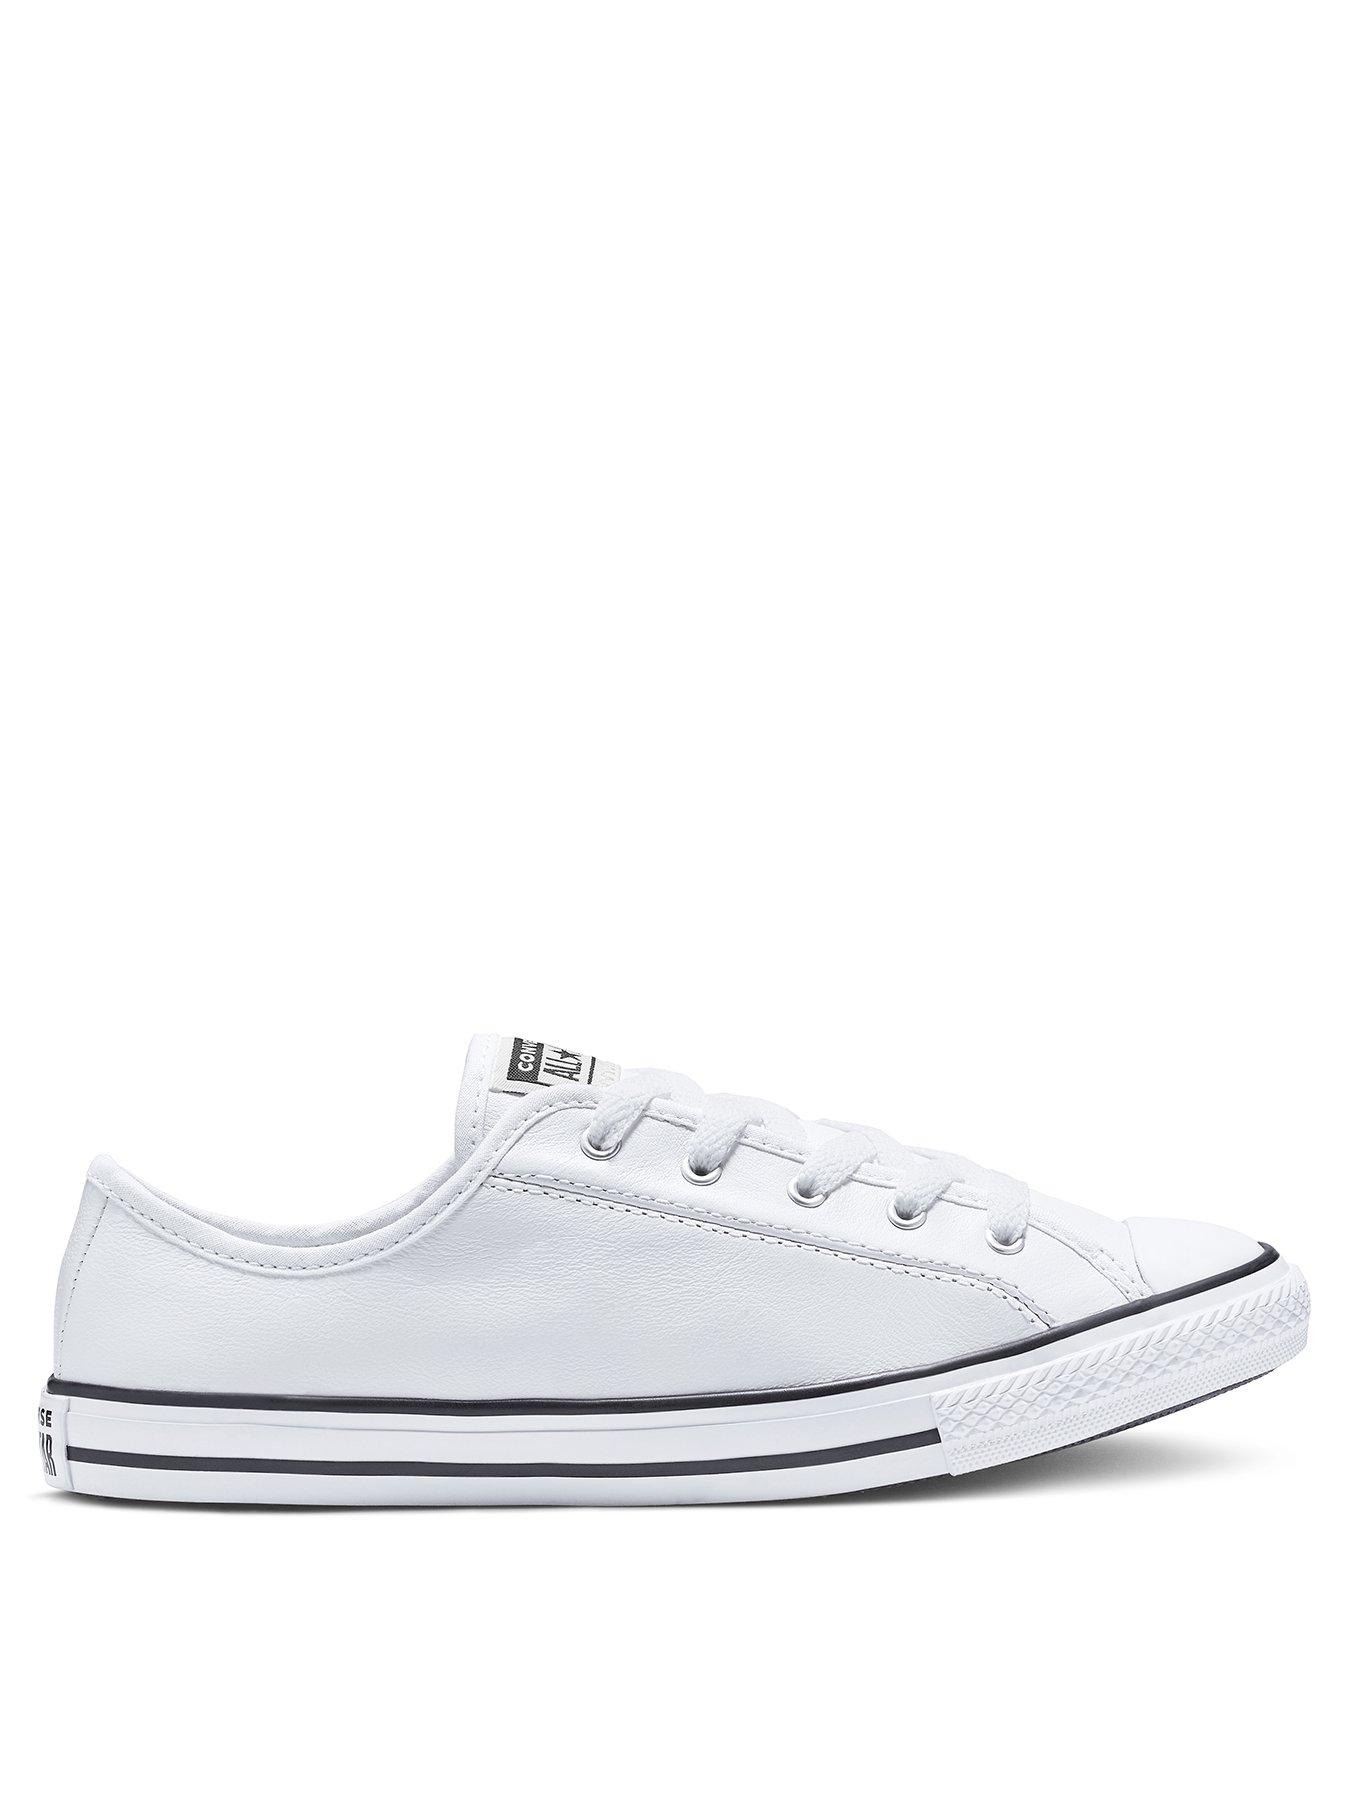 converse leather dainty white